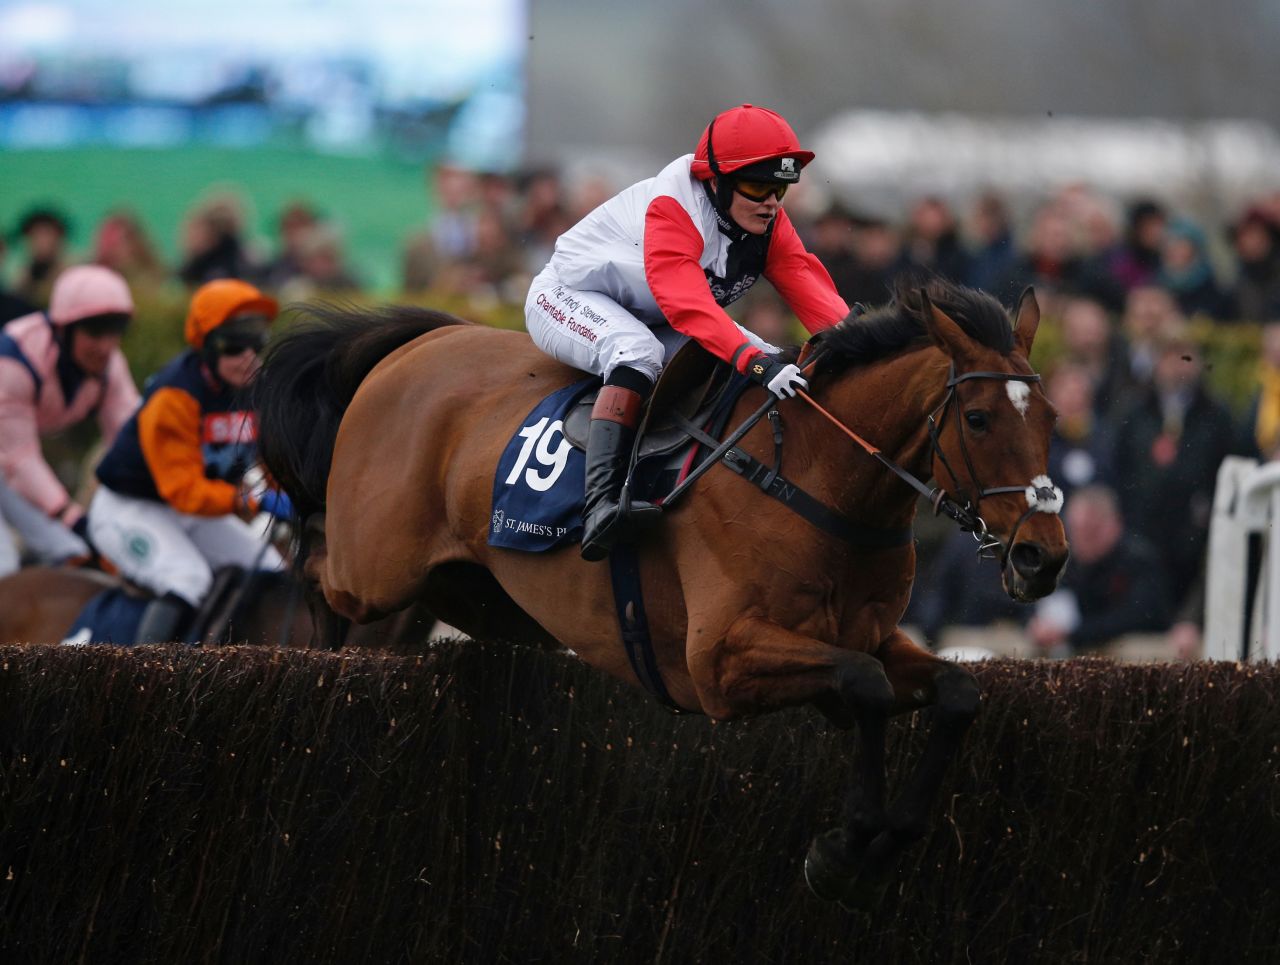 Pendleton competed over the jumps and exceeded expectations with a fifth placed finish out of 24 runners. She received a huge cheer from the crowd on Gold Cup day.